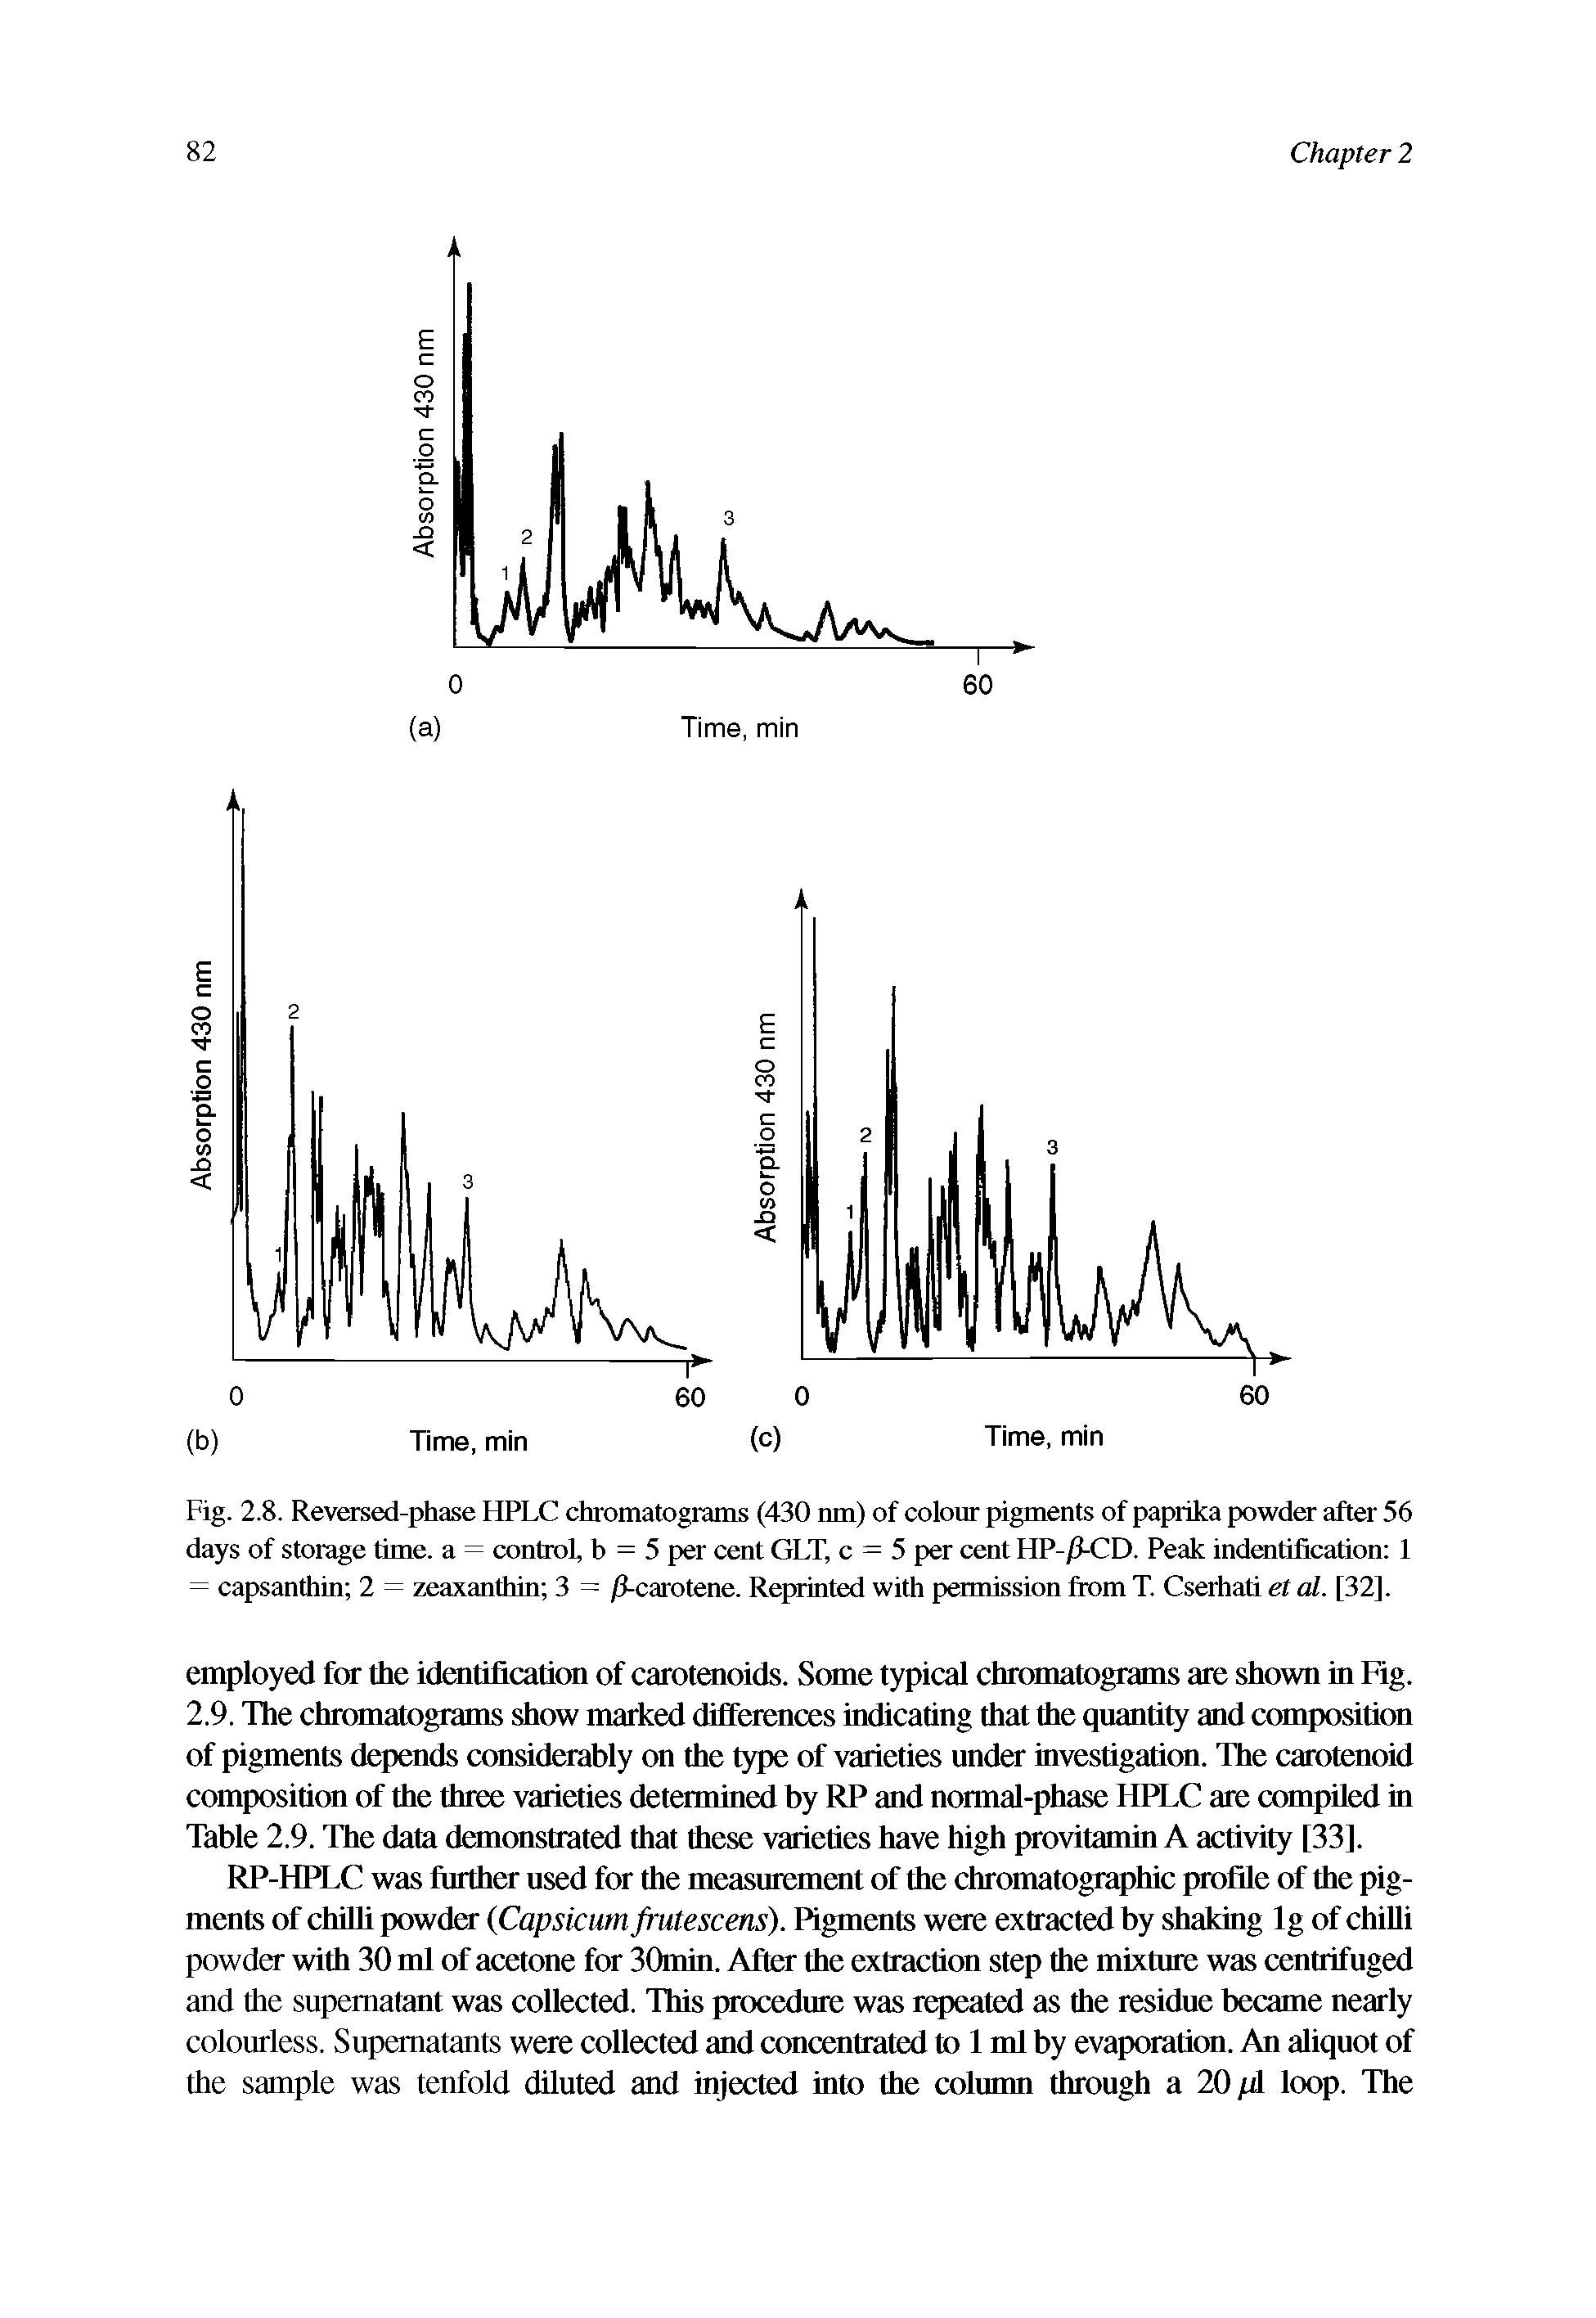 Fig. 2.8. Reversed-phase HPLC chromatograms (430 nm) of colour pigments of paprika powder after 56 days of storage time, a = control, b = 5 per cent GLT, c = 5 per cent HP-/3-CD. Peak indentification 1 = capsanthin 2 = zeaxanthin 3 = /3-carotene. Reprinted with permission from T. Cserhati el al. [32].